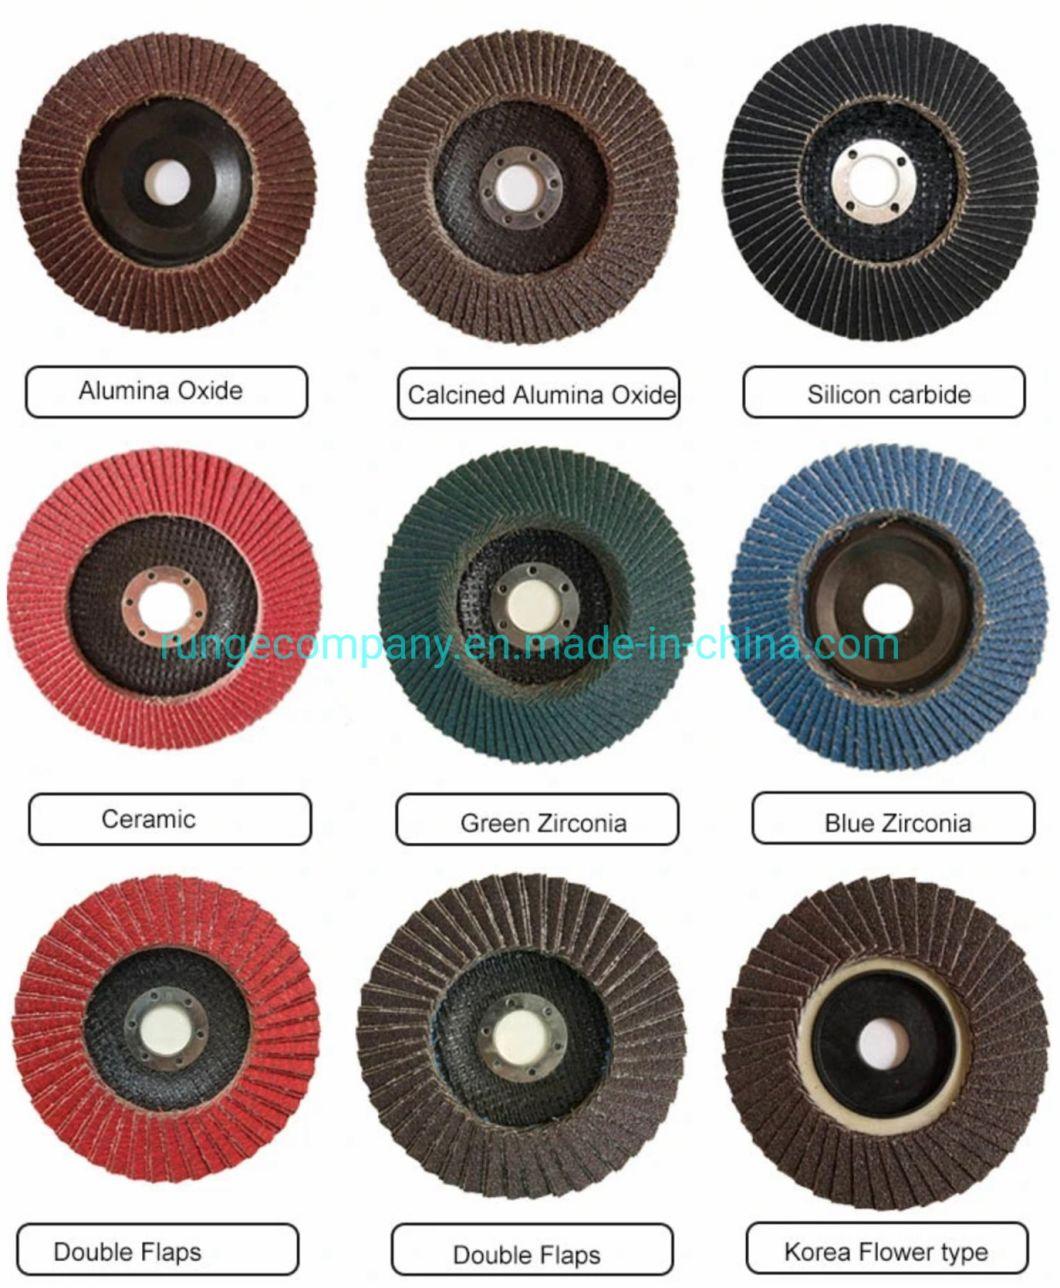 Power Electric Tools Accessories Abrasives Type 1 14-Inch X 3/32-Inch Chop Saw Blade Fast Cutting Disc Wheel